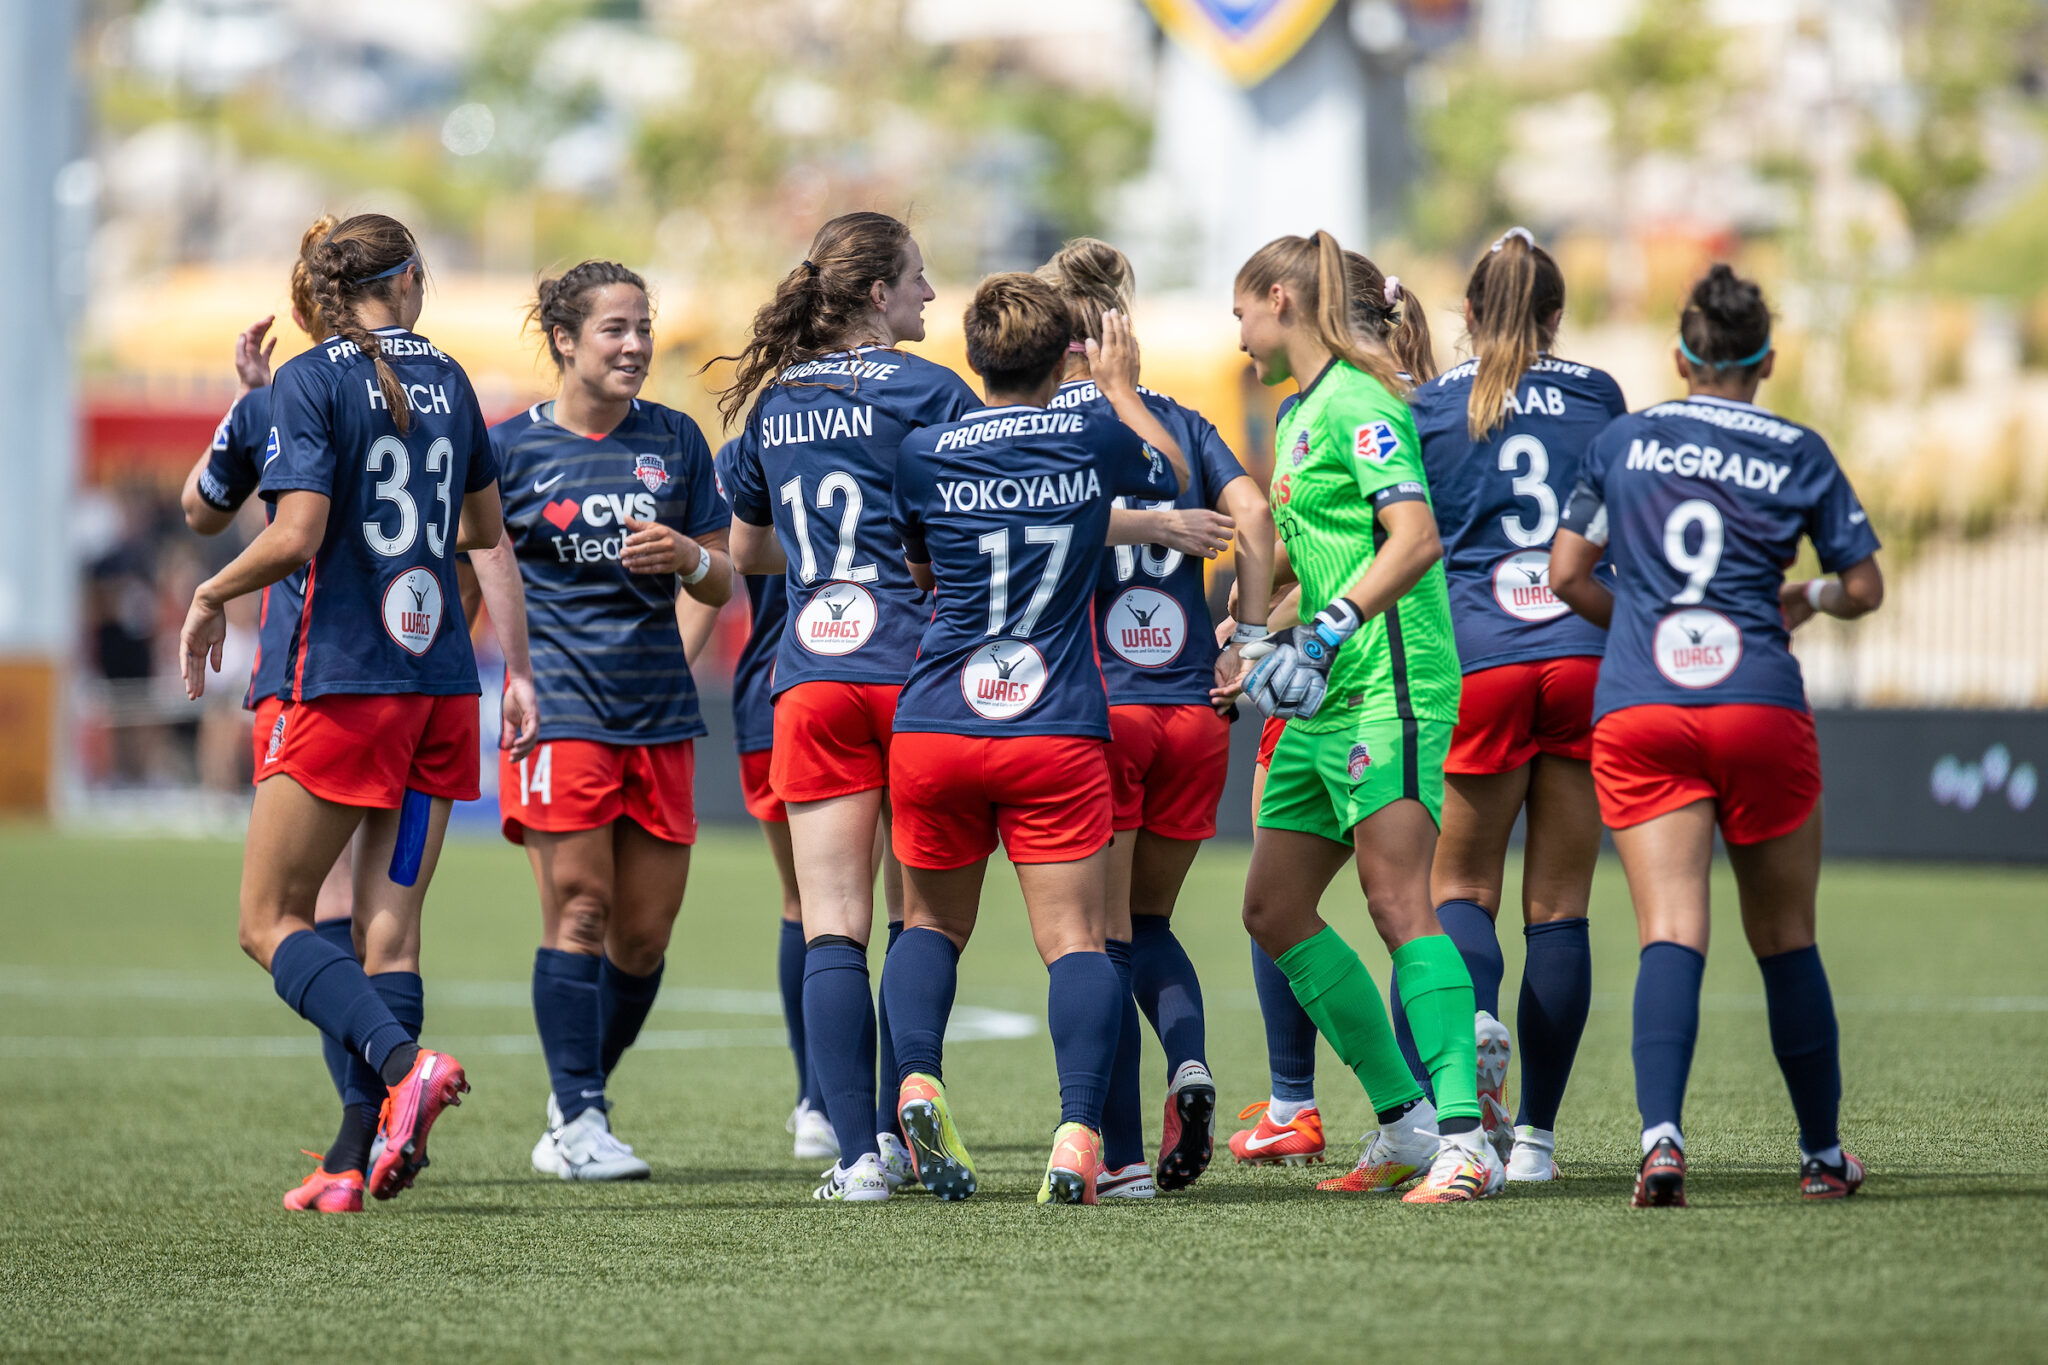 Spirit face Sky Blue in the quarterfinals of the NWSL Challenge Cup Featured Image